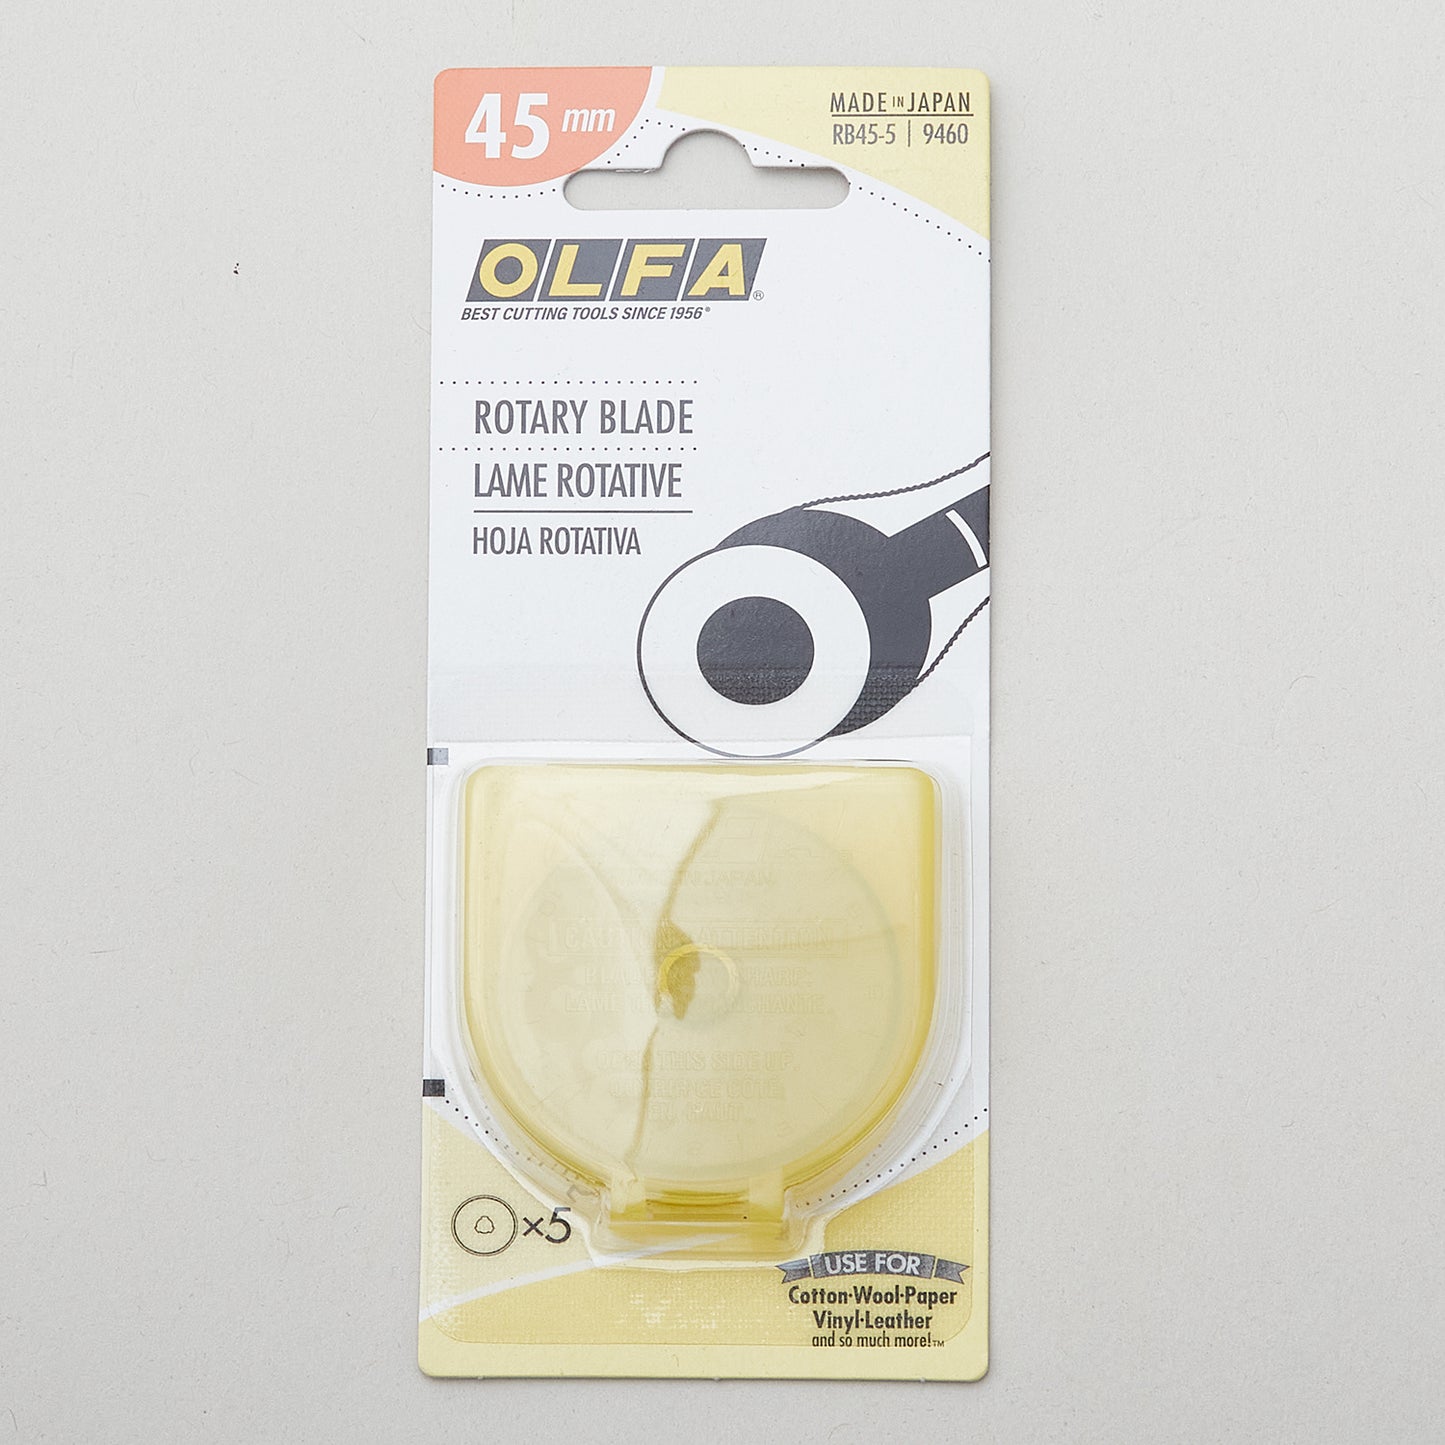 Olfa 45mm Rotary Replacement Blades - 5 Pack Alternative View #3